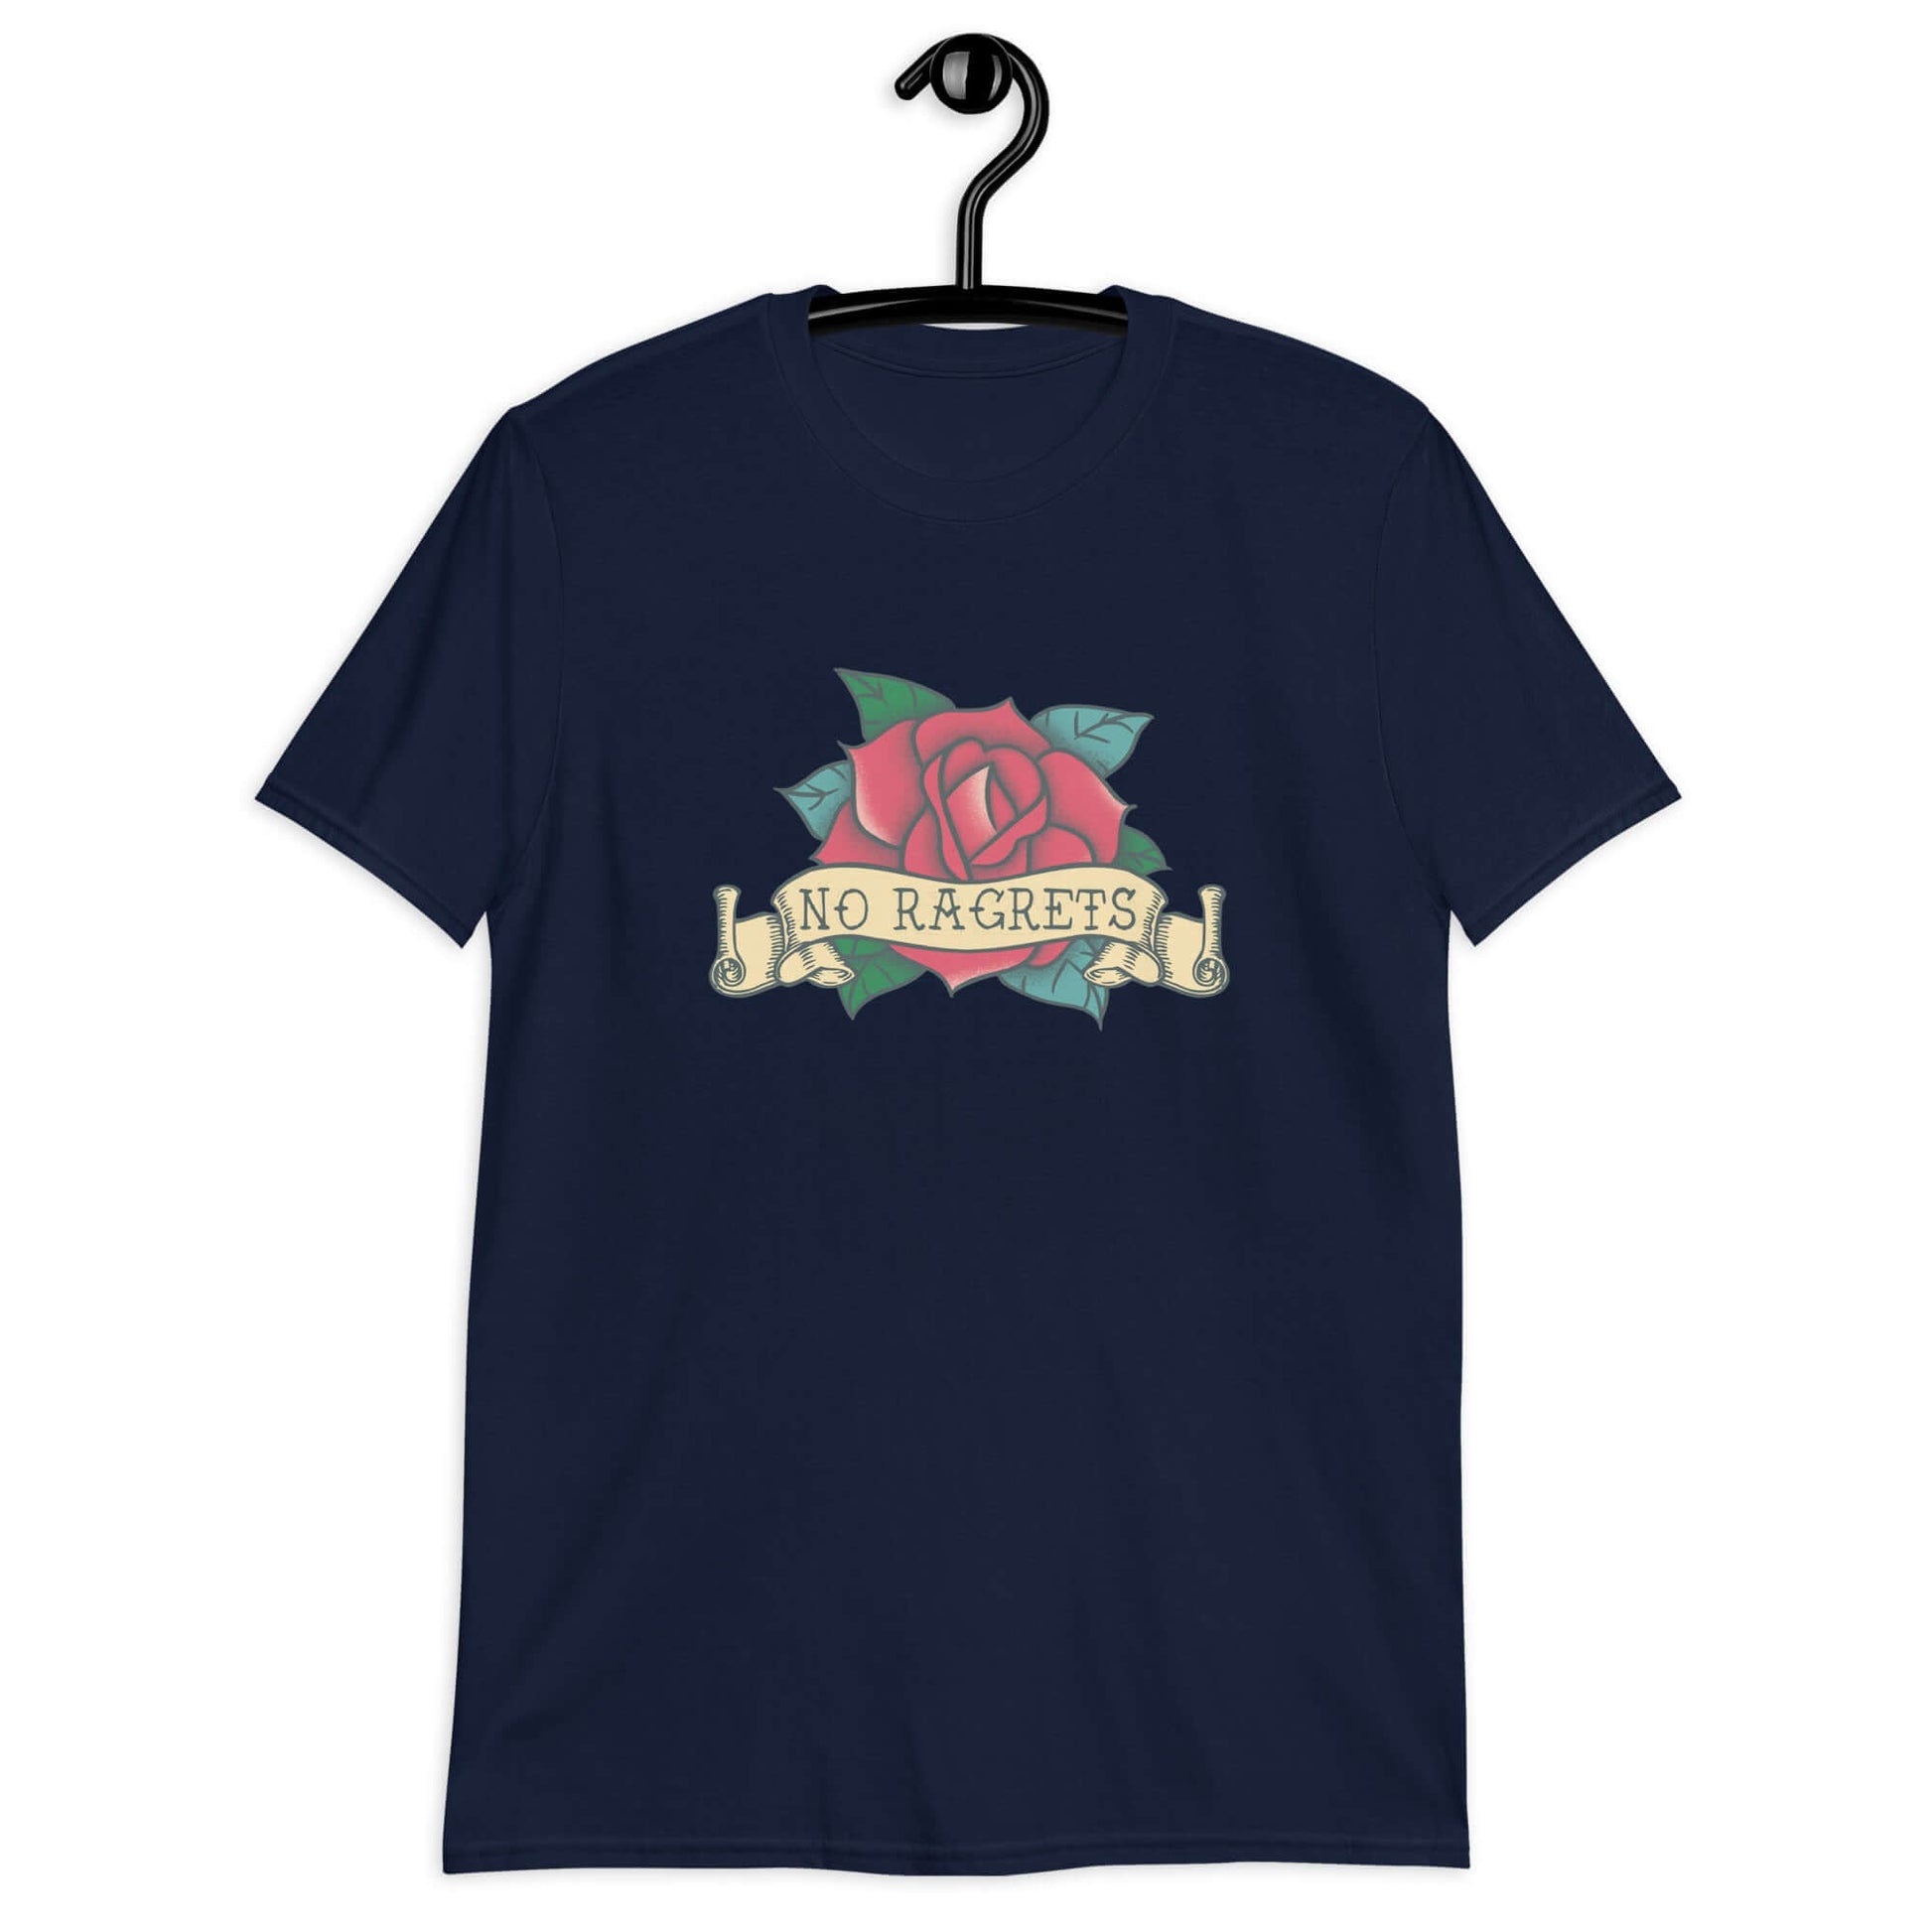 Navy blue t-shirt with a funny image of an old school rose flash tattoo & the words no ragrets. The word regrets is intentionally misspelled.